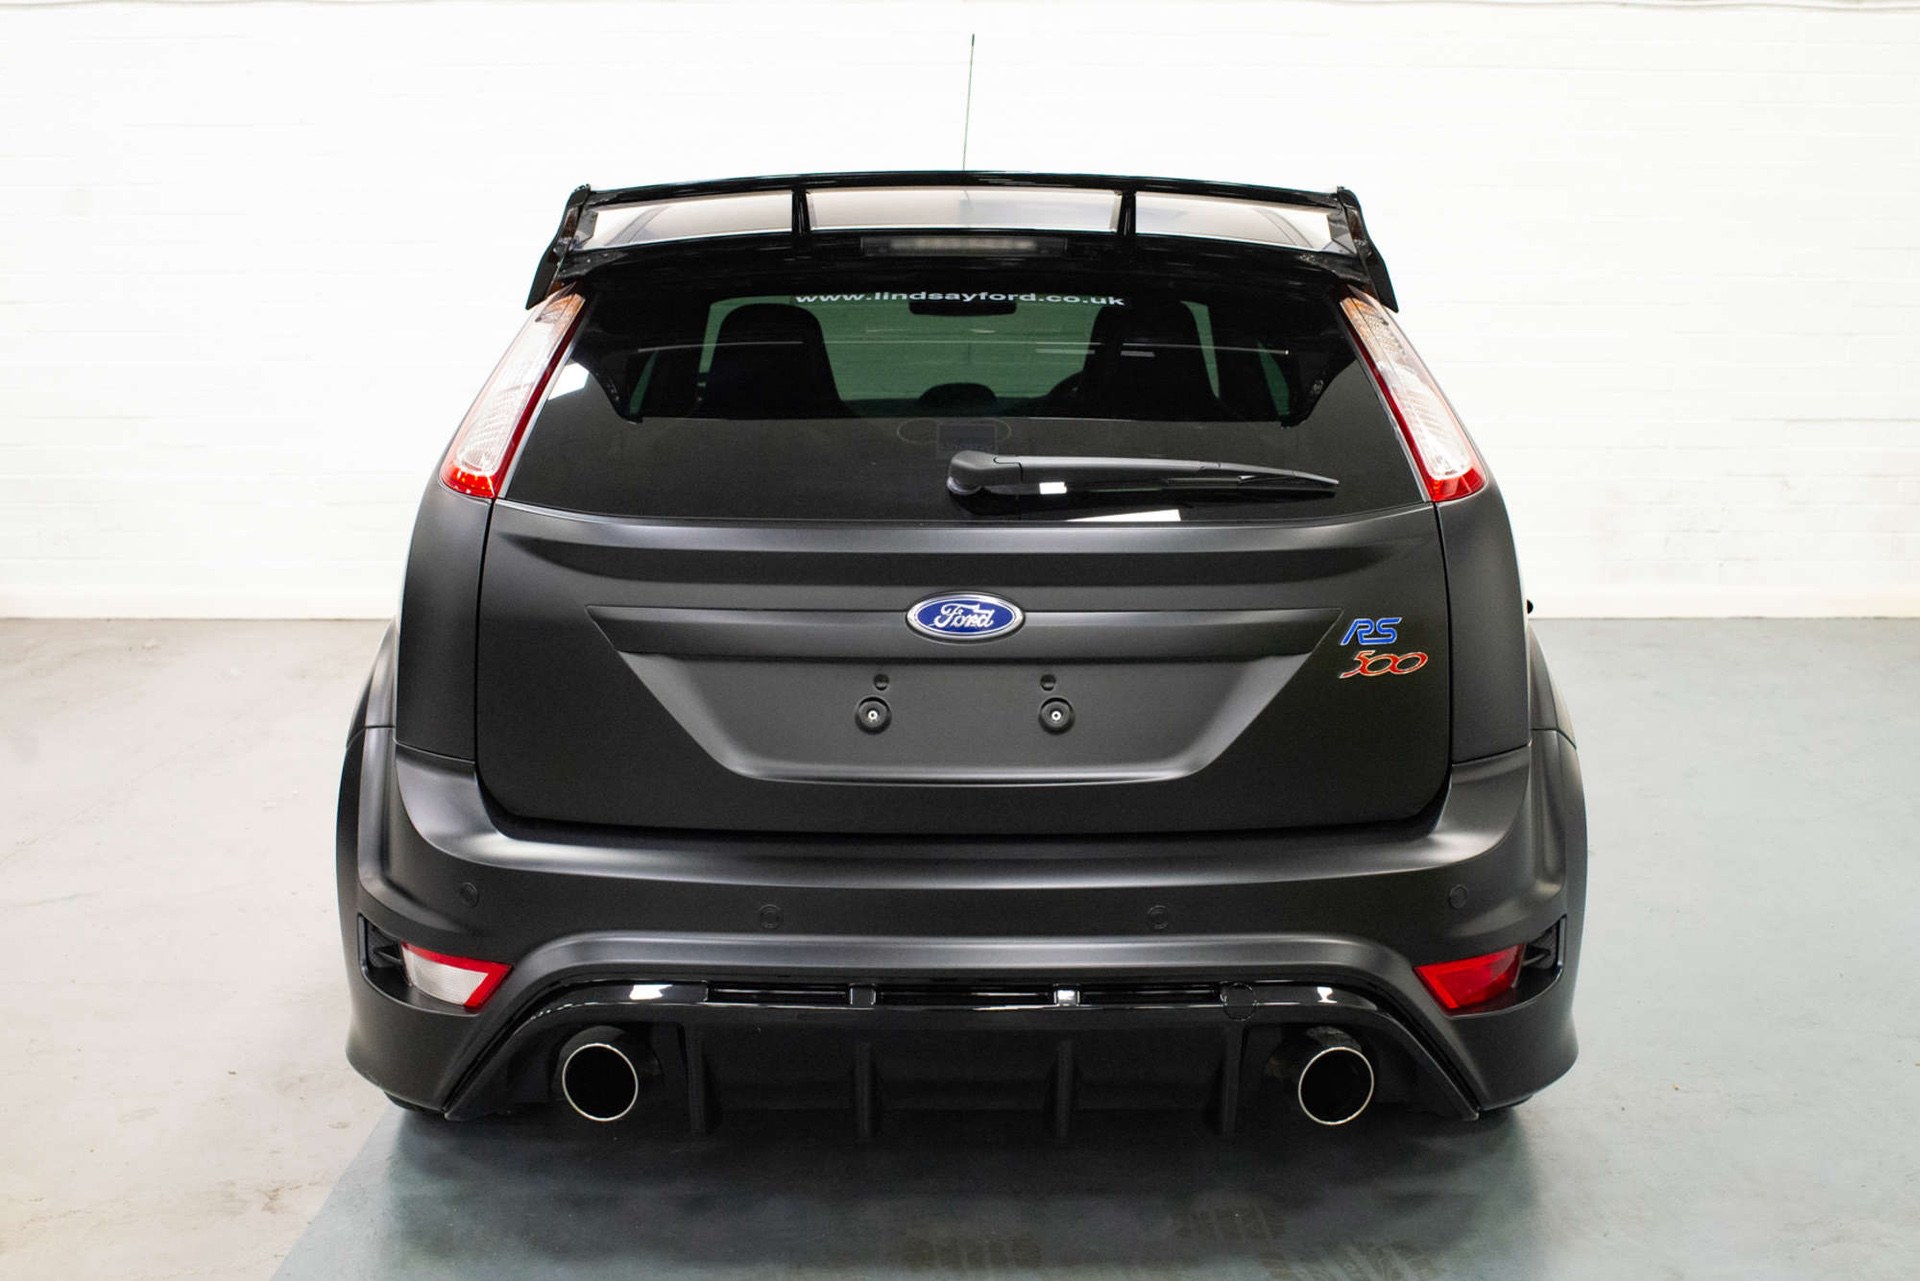 2010_Ford_Focus_RS500_sale-02